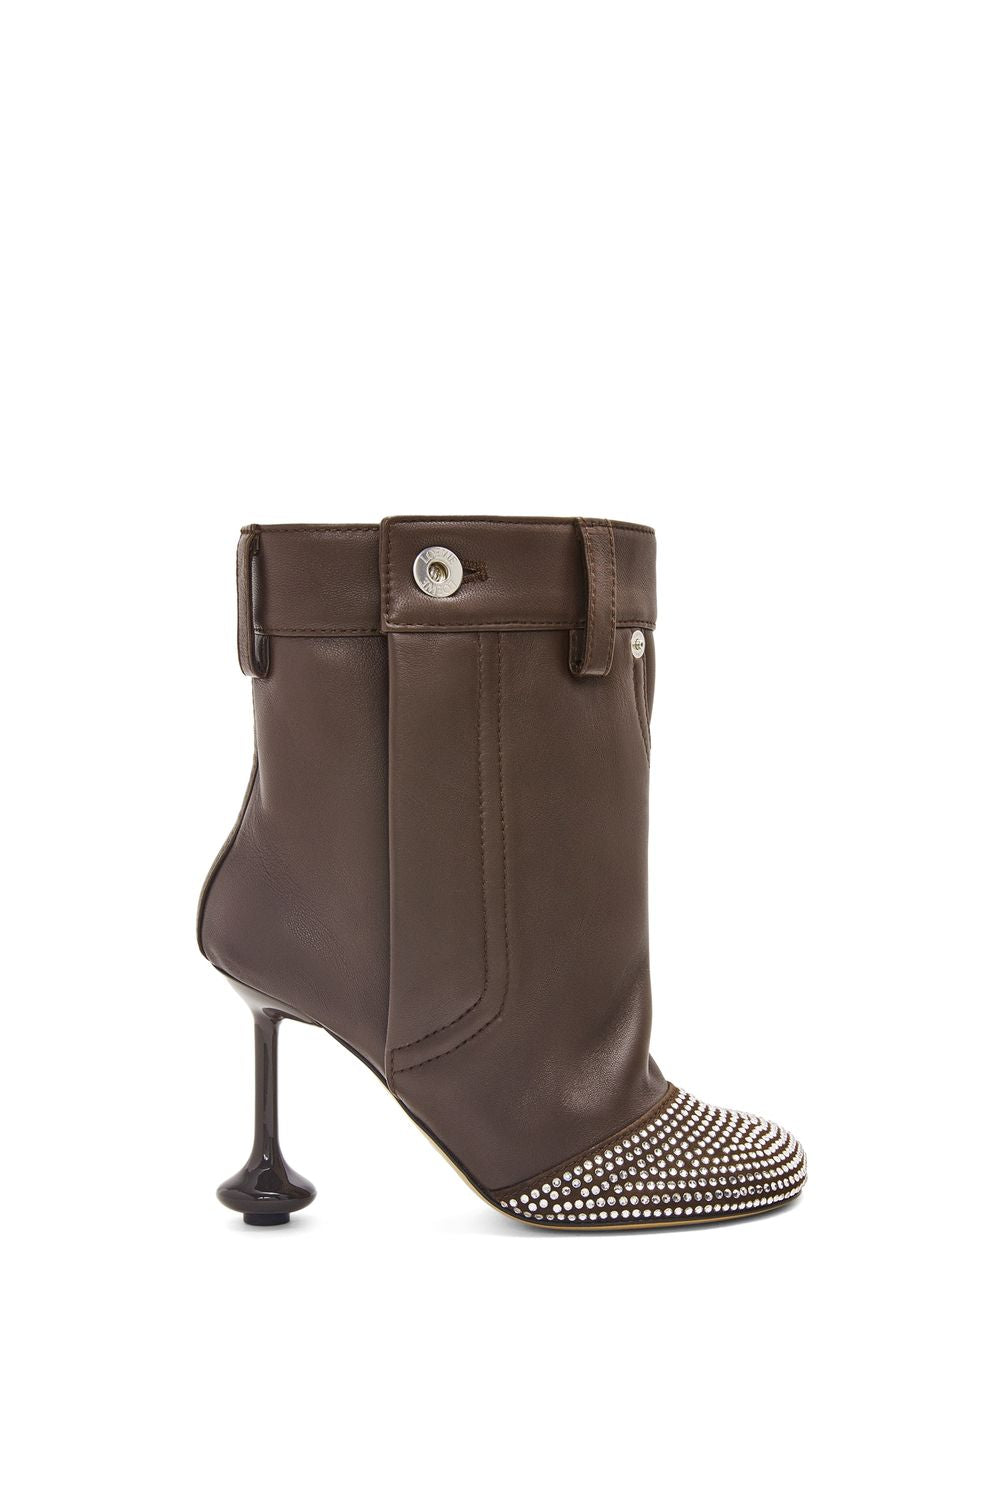 LOEWE Stylish Brown Ankle Boots for Women - FW23 Collection